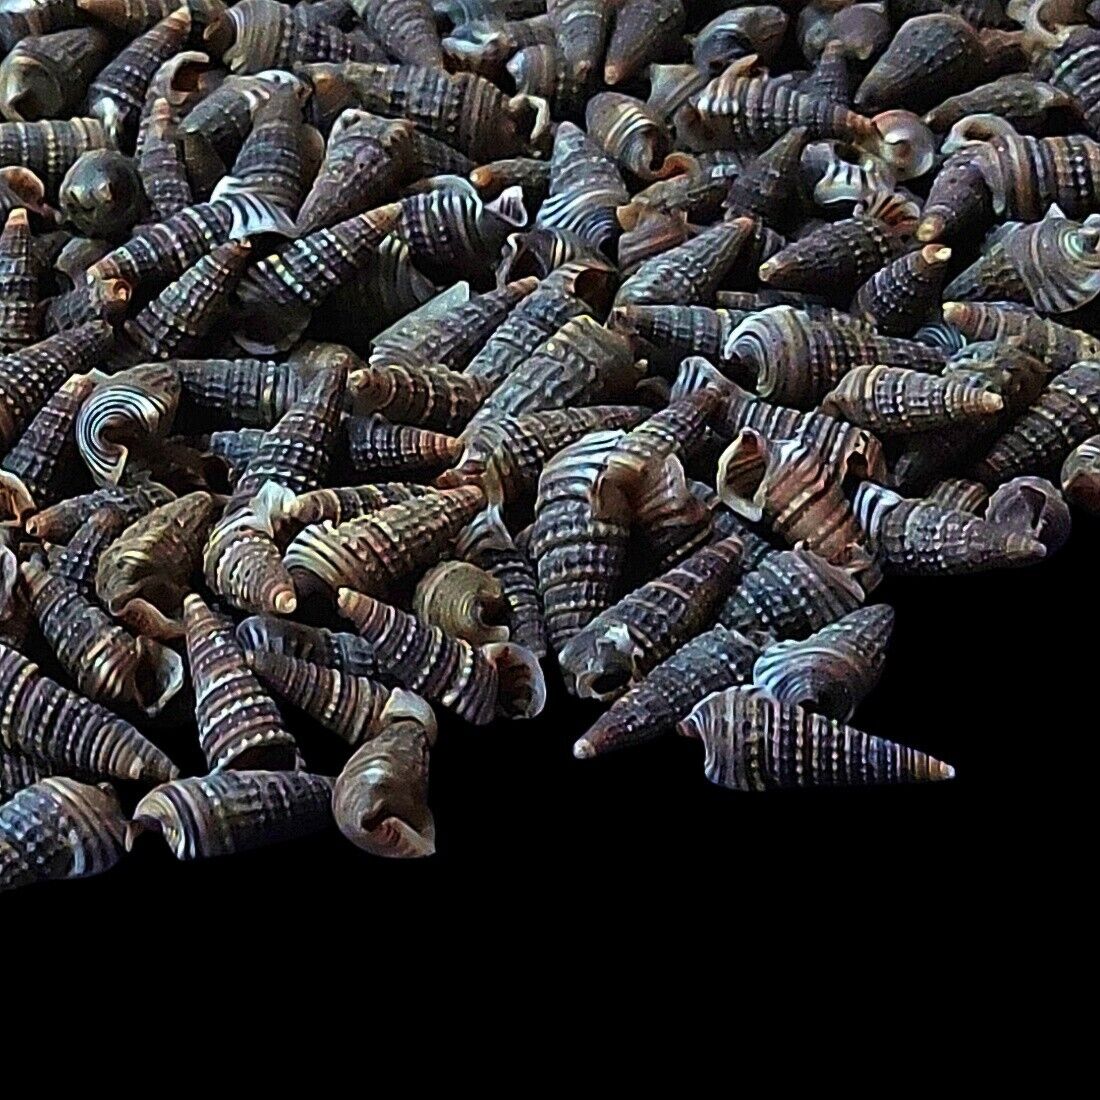 Tiny Spiral Black Spotted Natural Shell For Crafts Art Decor approx. 1000 Pcs